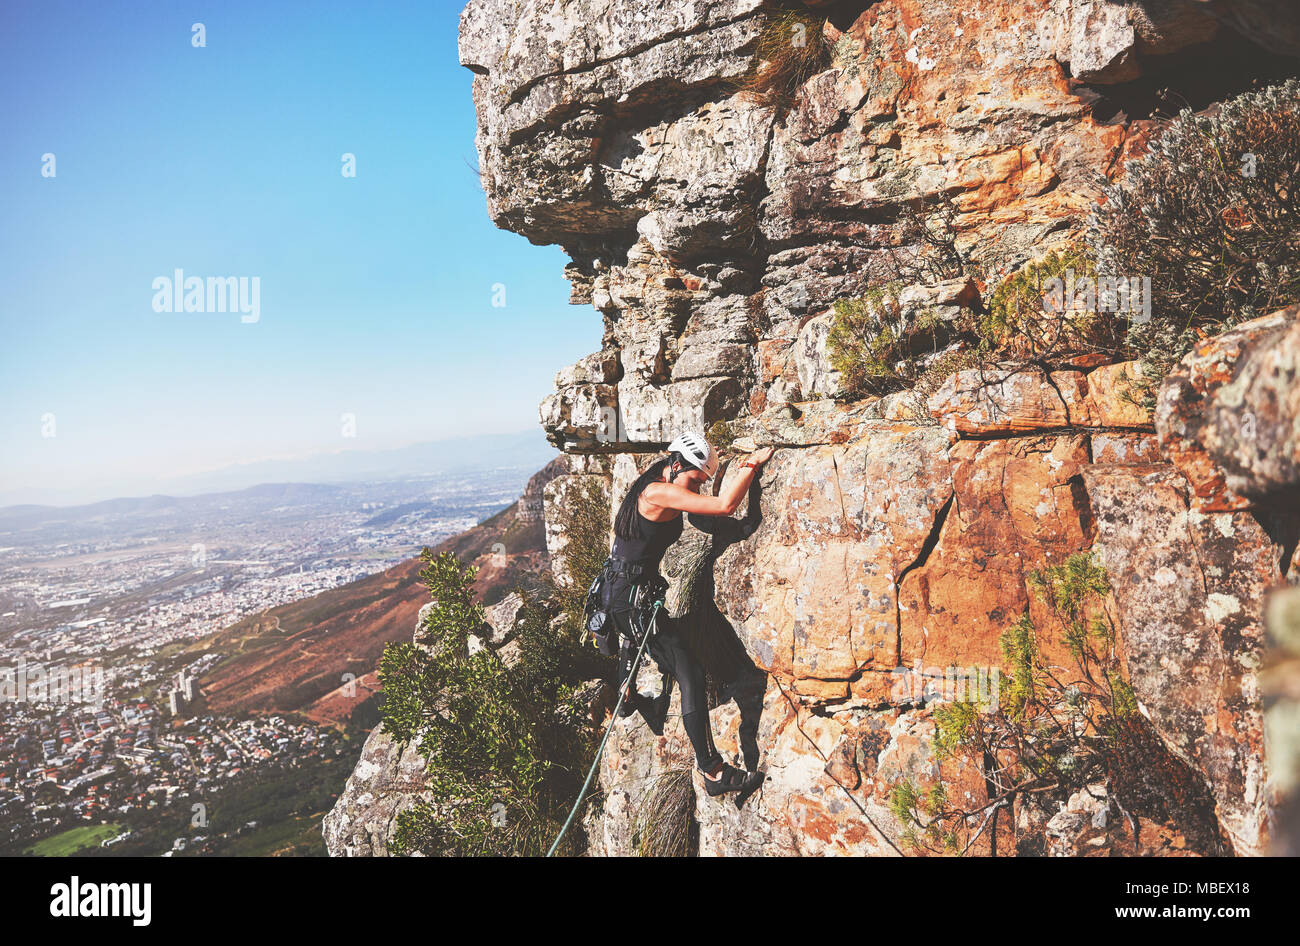 Female rock climber hanging from rock Banque D'Images